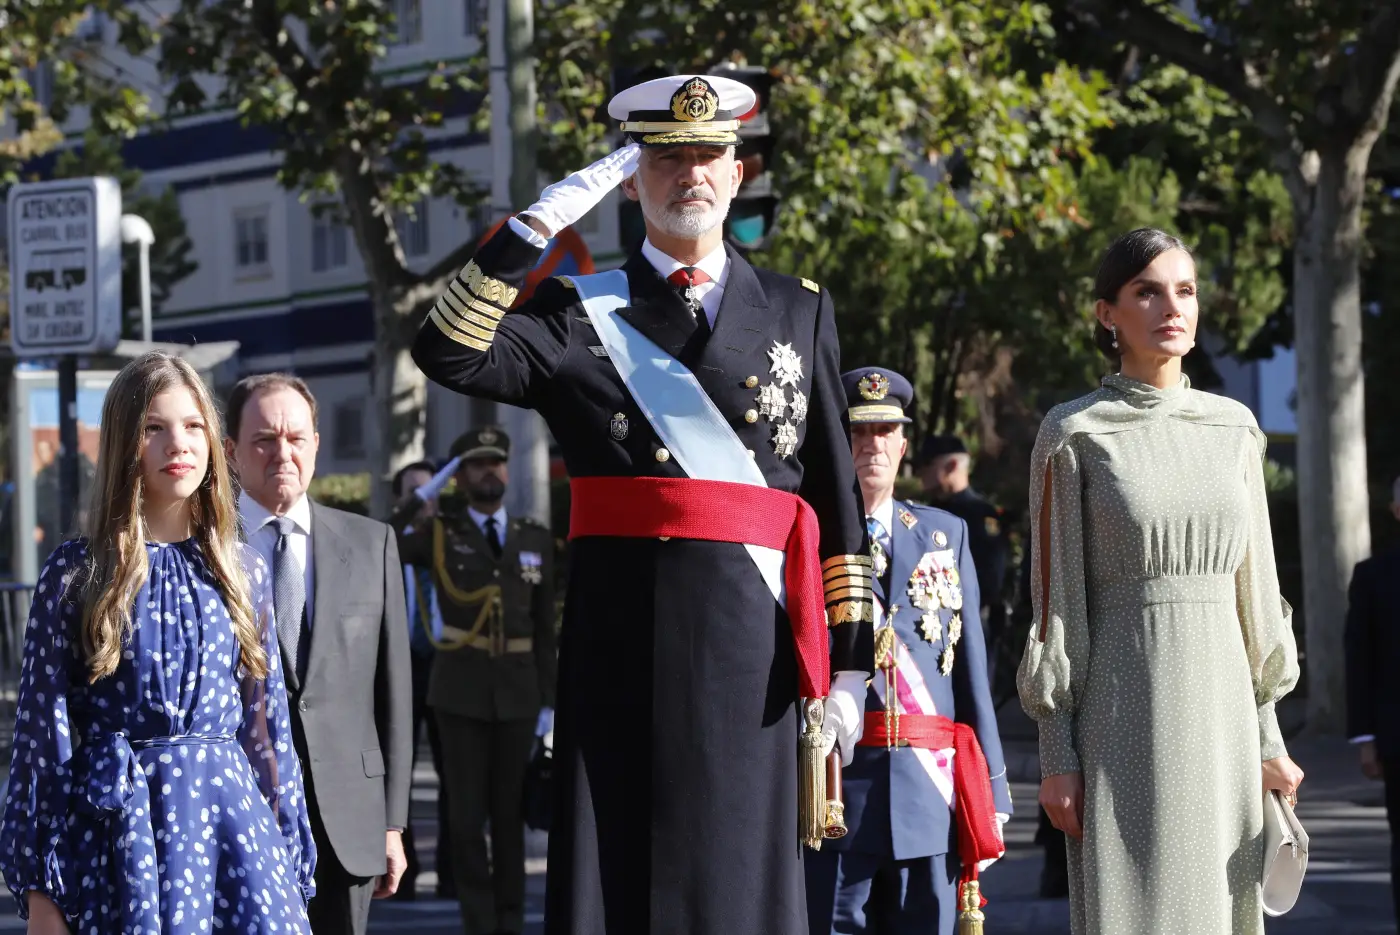 Spanish Royal Family attended National Day event